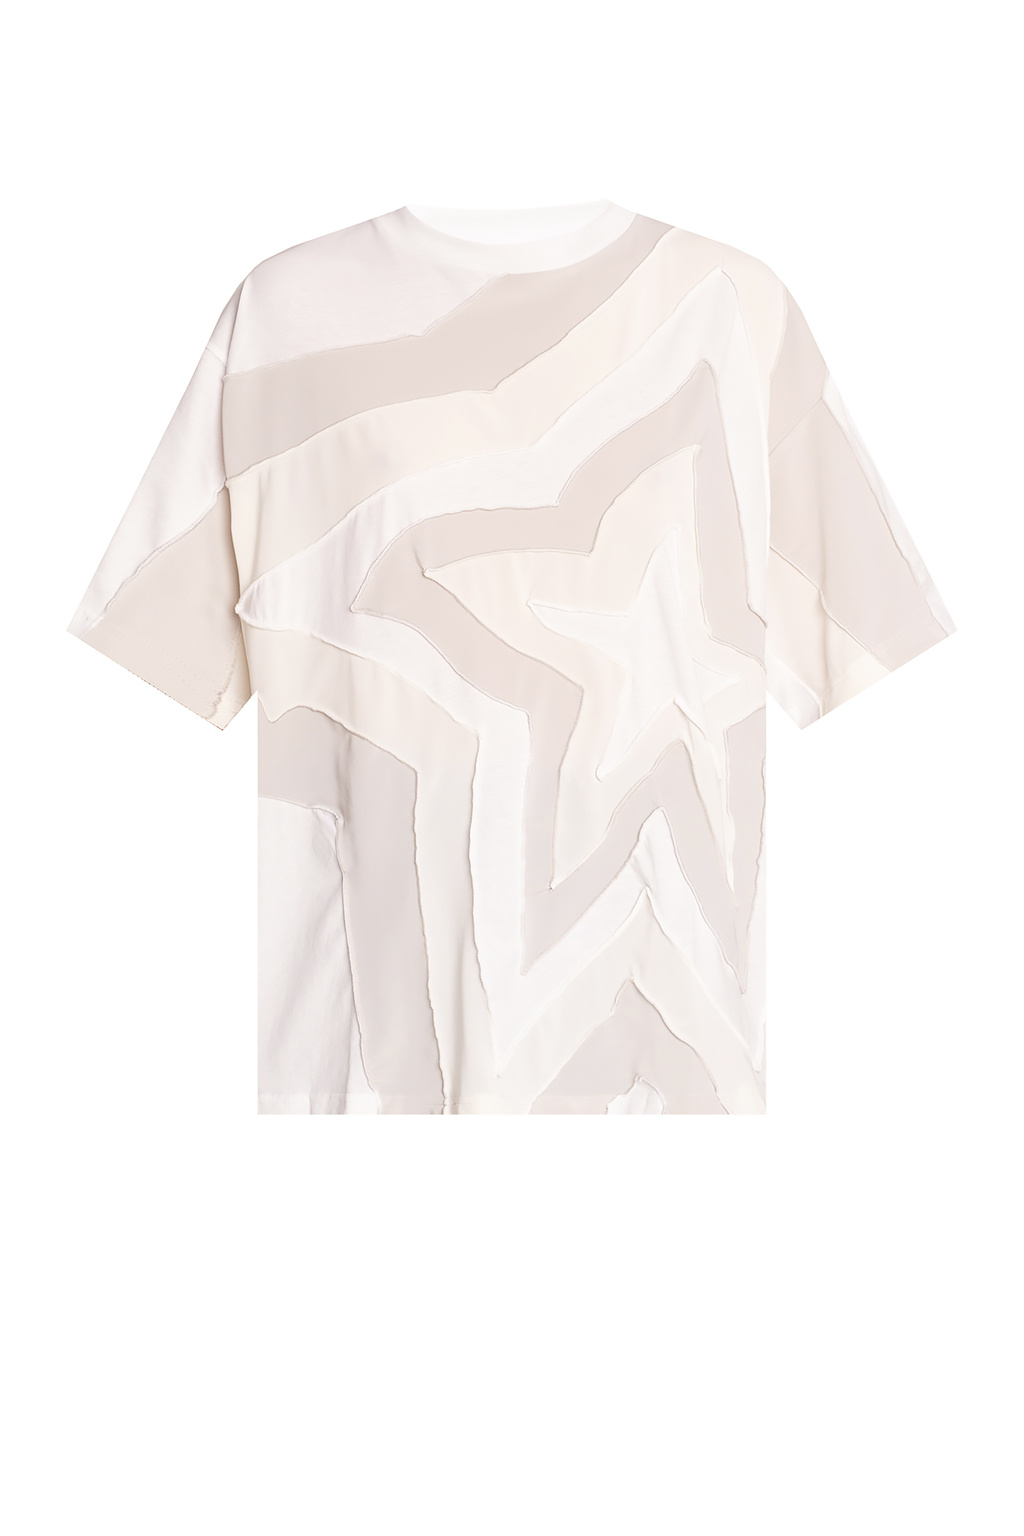 Acne Studios T-shirt with stitching details | Women's Clothing